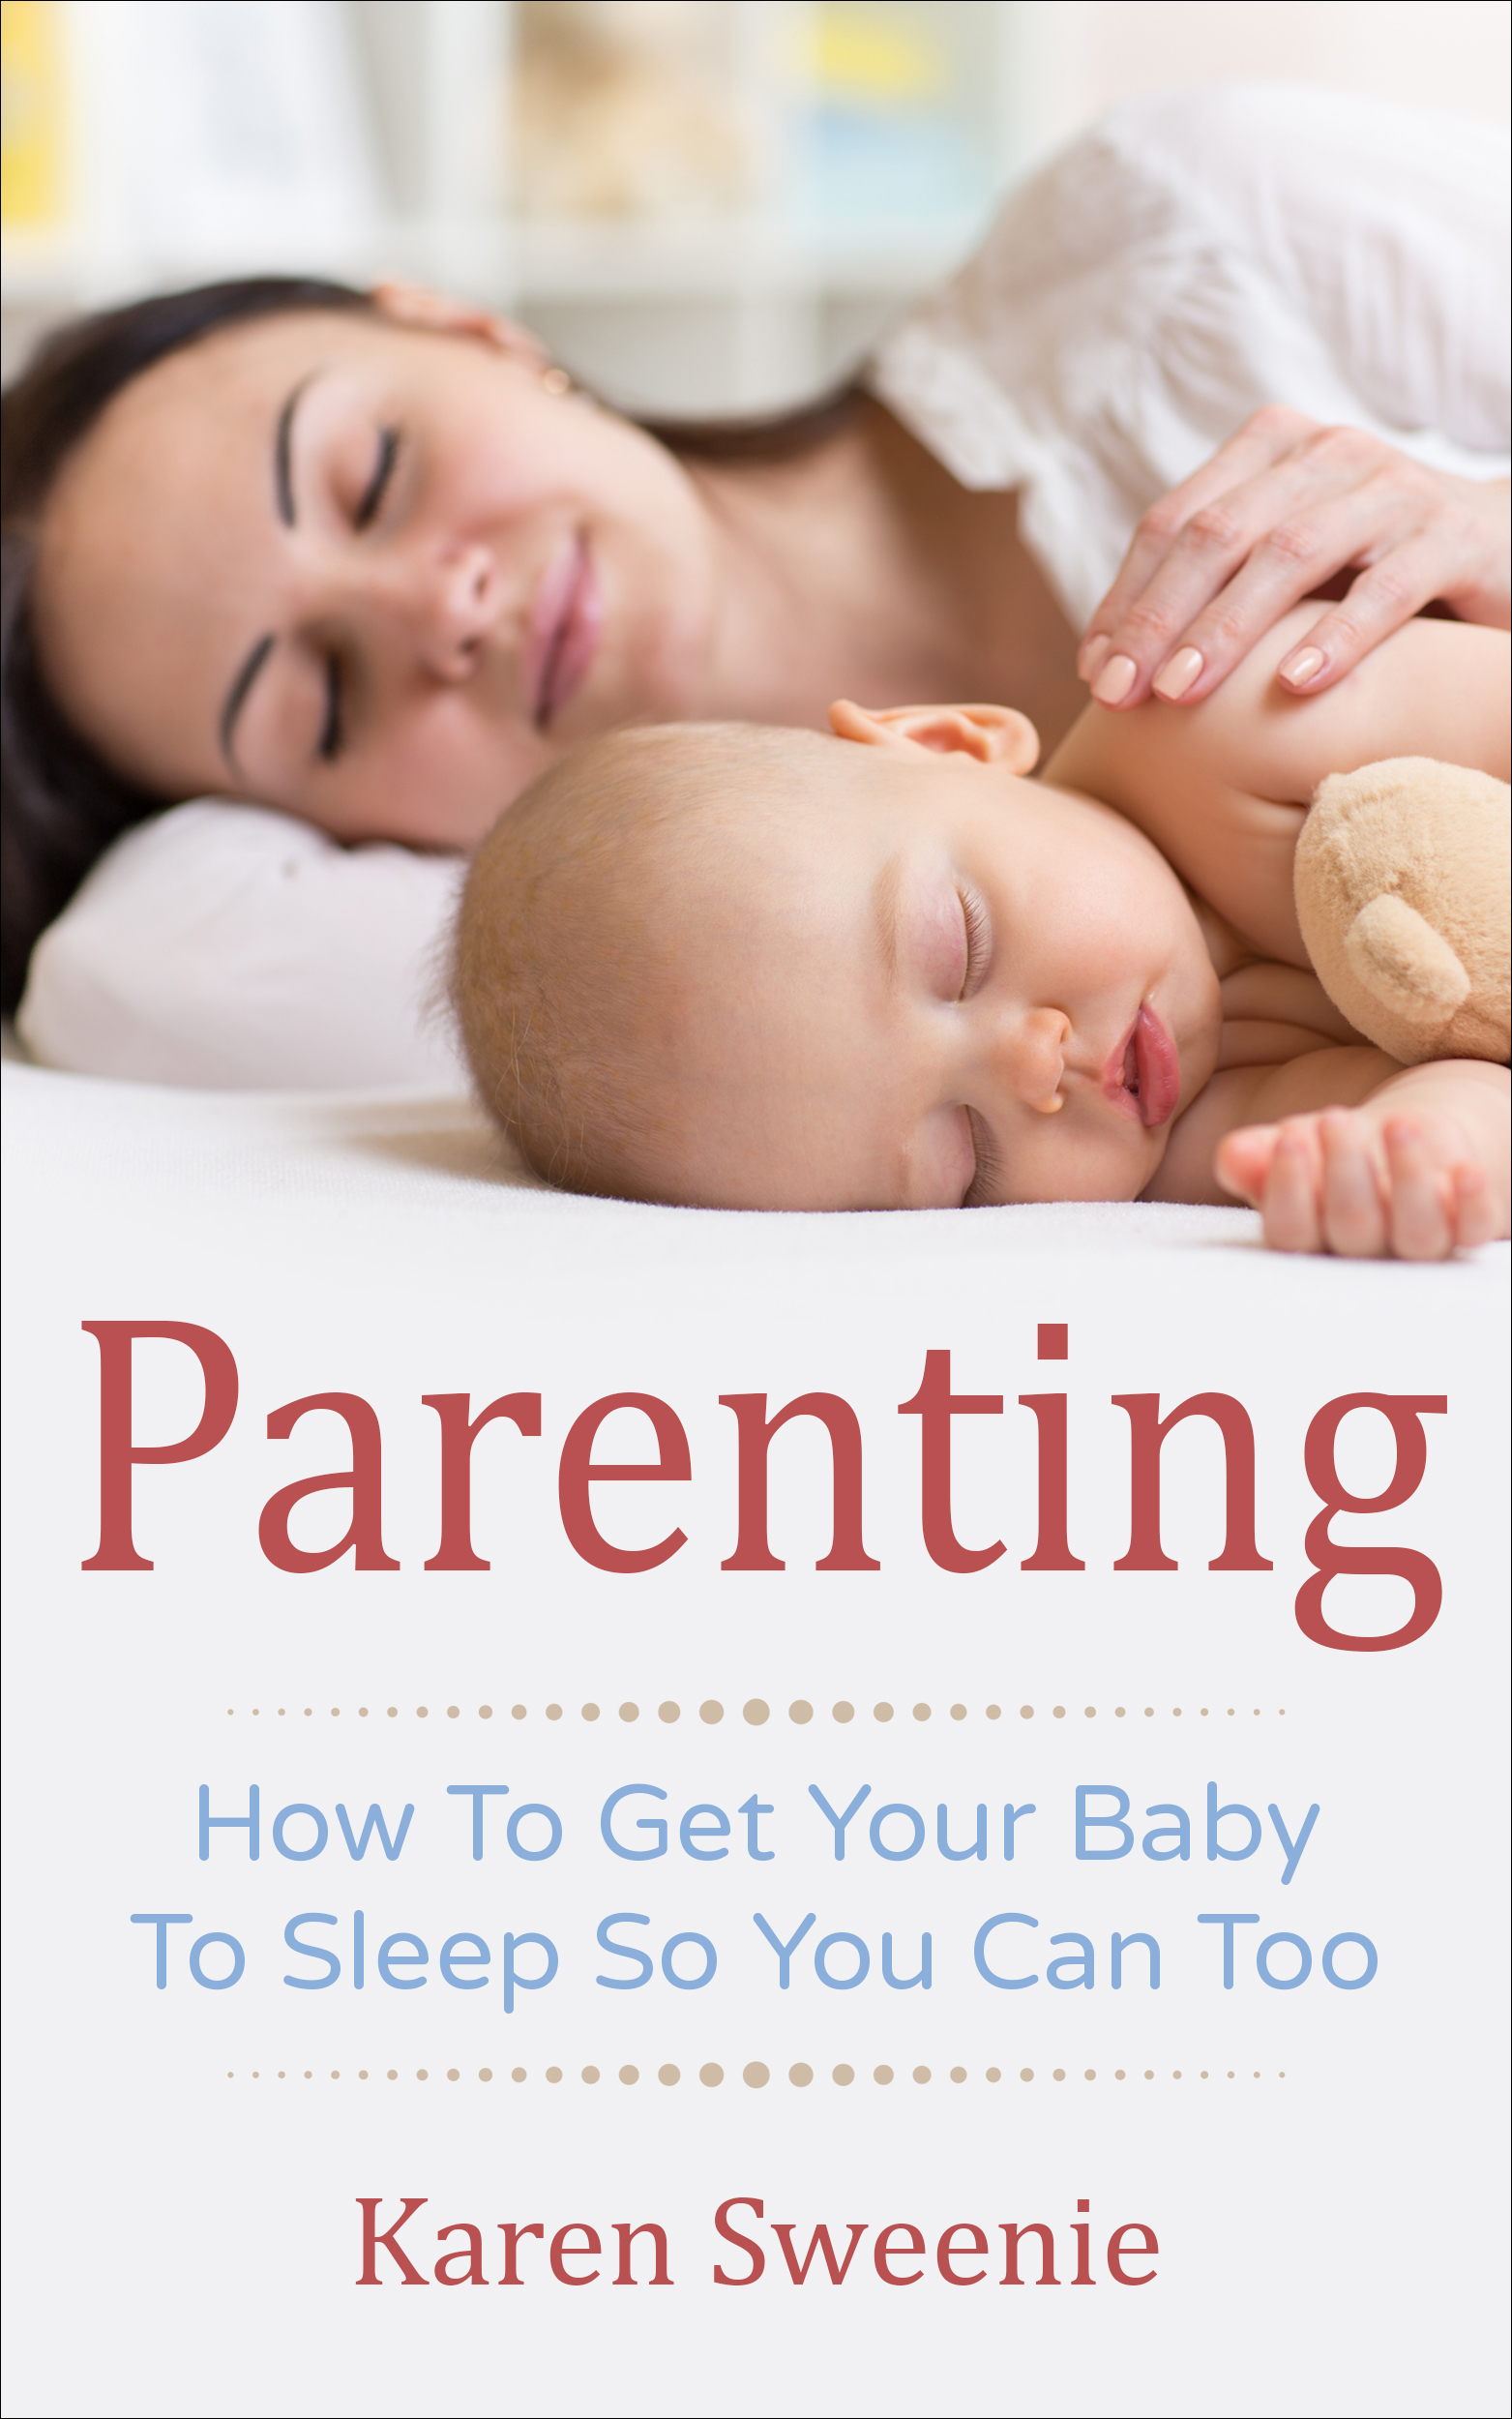 FREE: Parenting: How To Get Your Baby To Sleep So You Can Too by Karen Sweenie